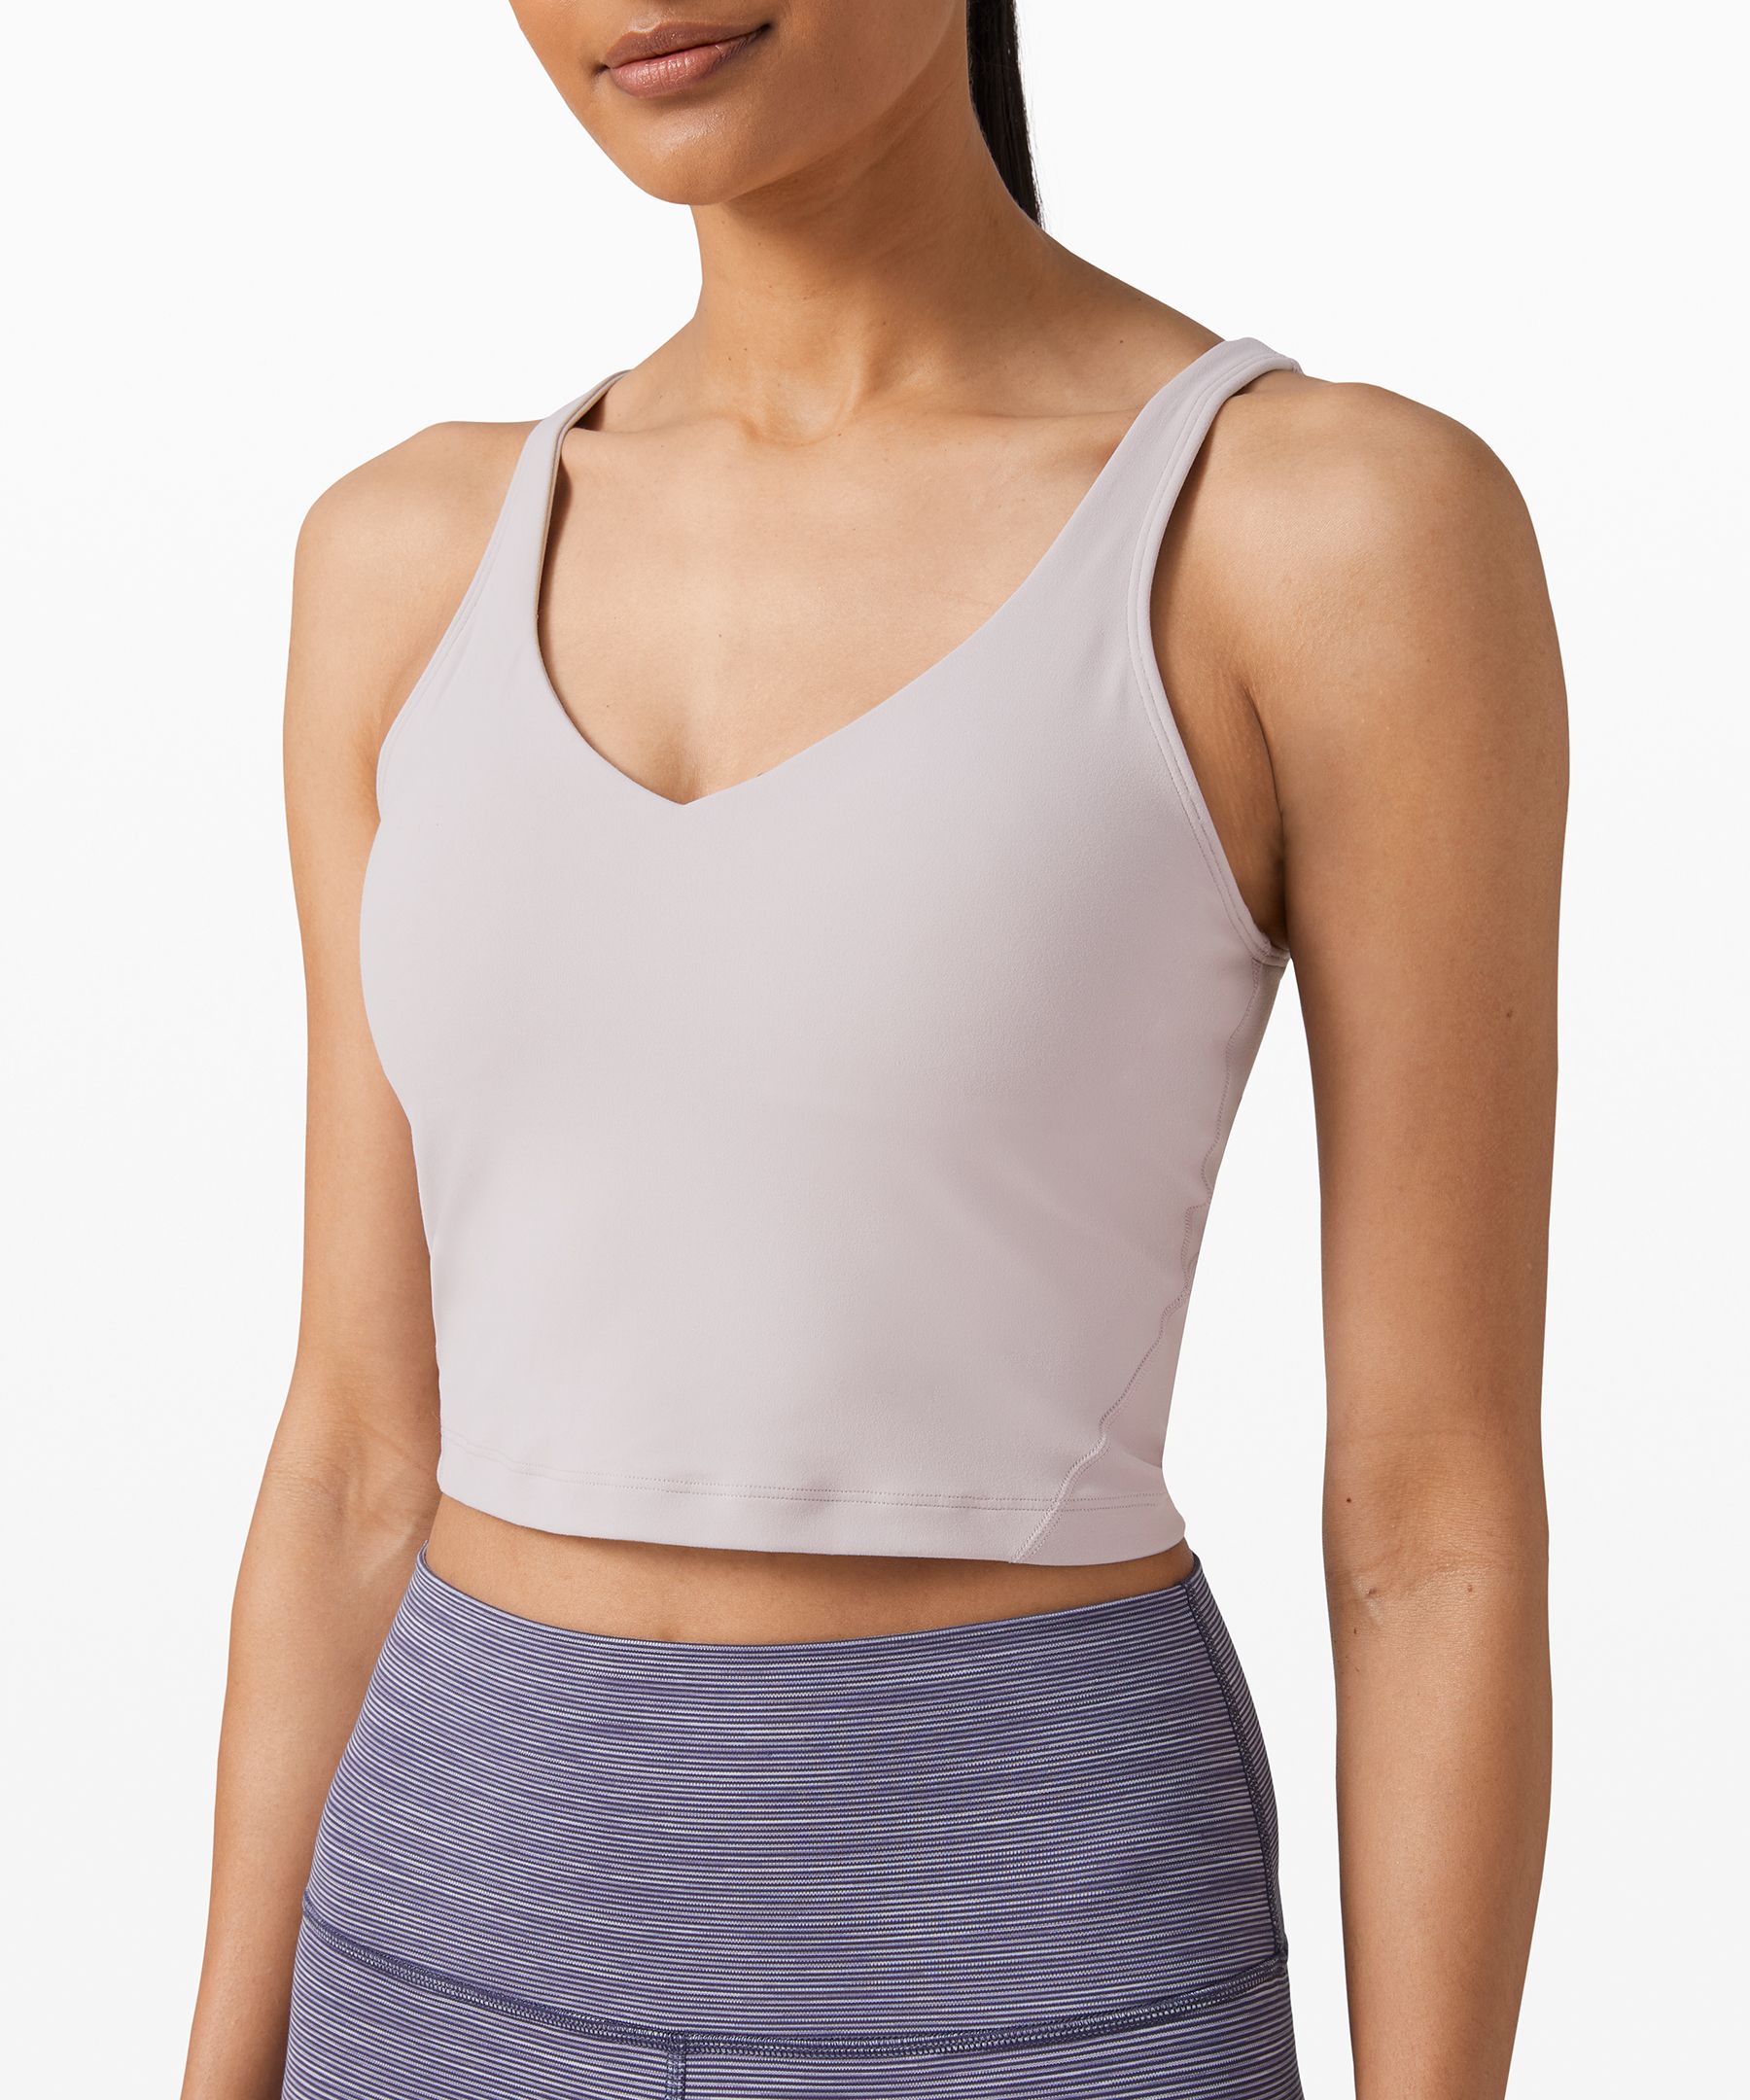 Align High-Neck Tank Top in Blue Nile - just arrived & I think